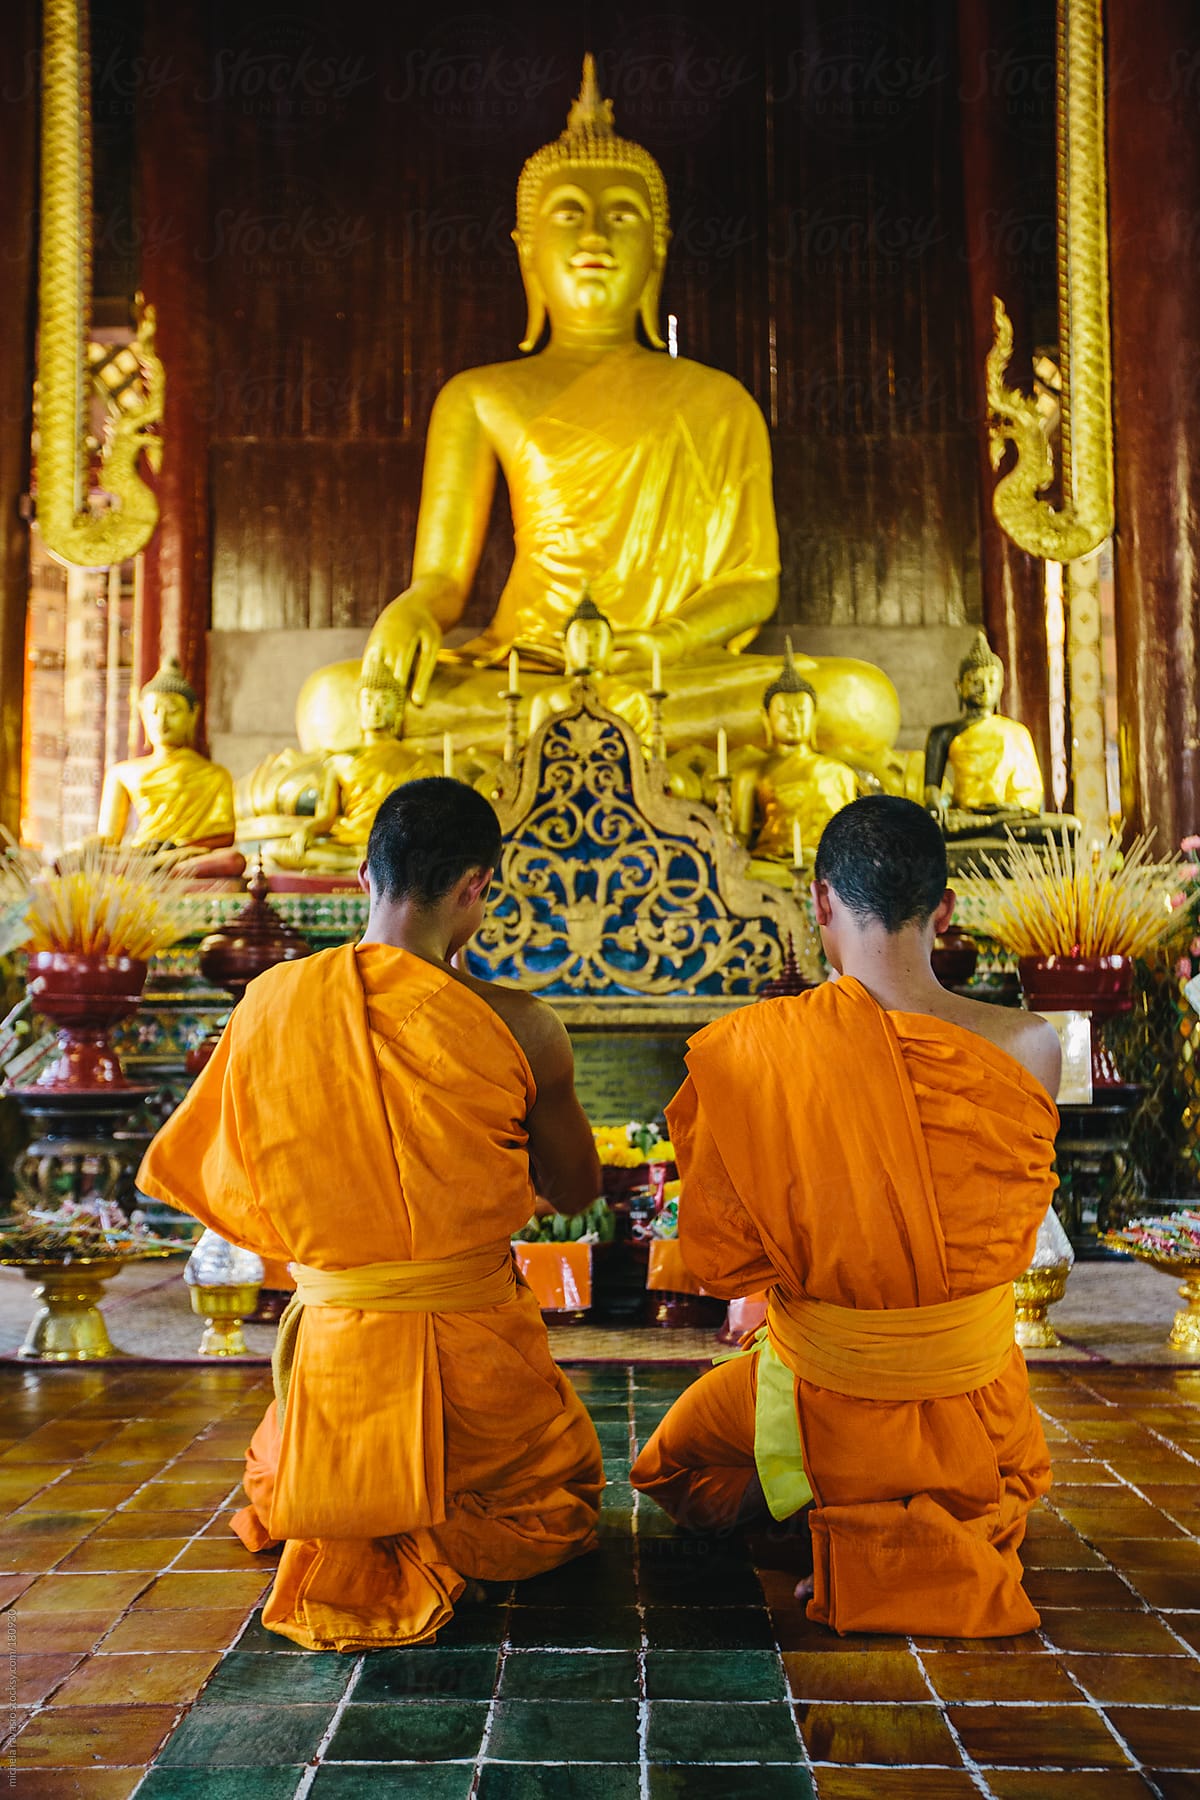 Two Buddhist Monks Praying In The Temple by Michela Ravasio